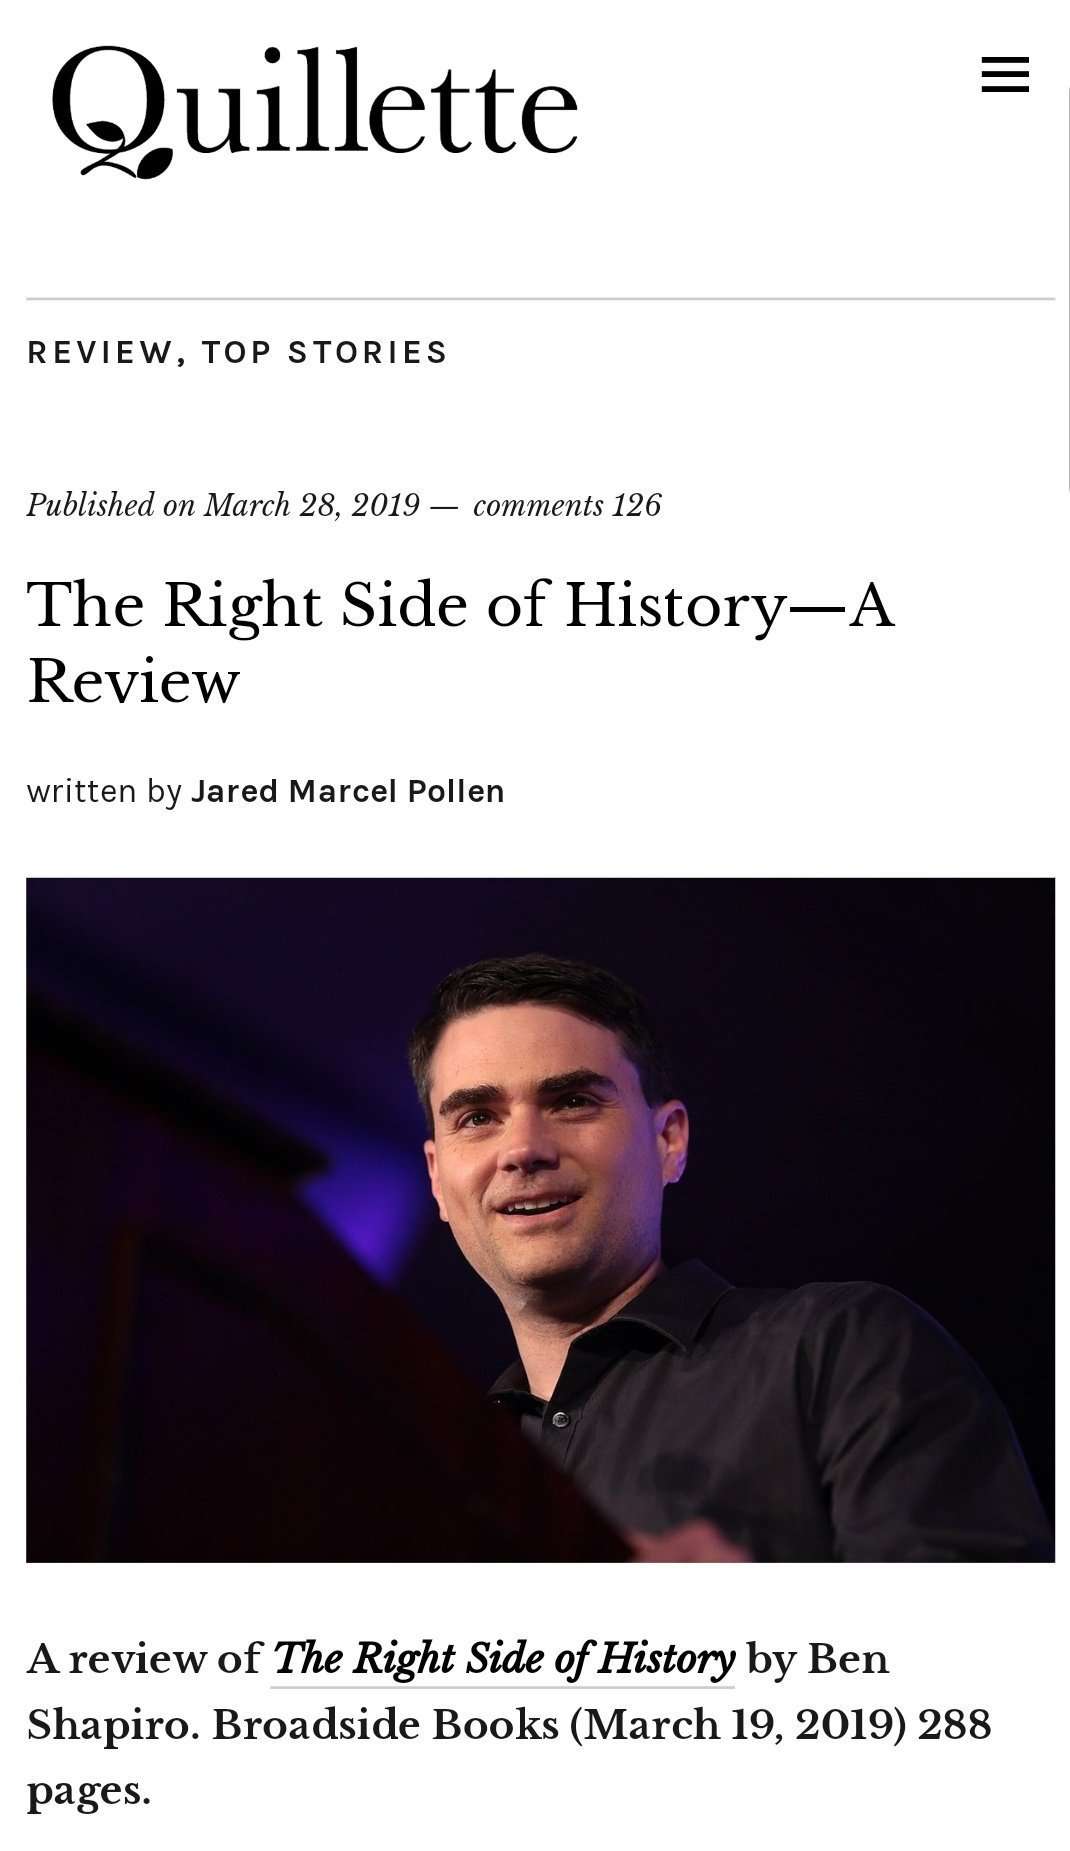 image for Wild Geerters auf Twitter: "So it's another one of those books about how bad things only happened because people rejected Christianity. How is Ben Shapiro any different than every other religious cons